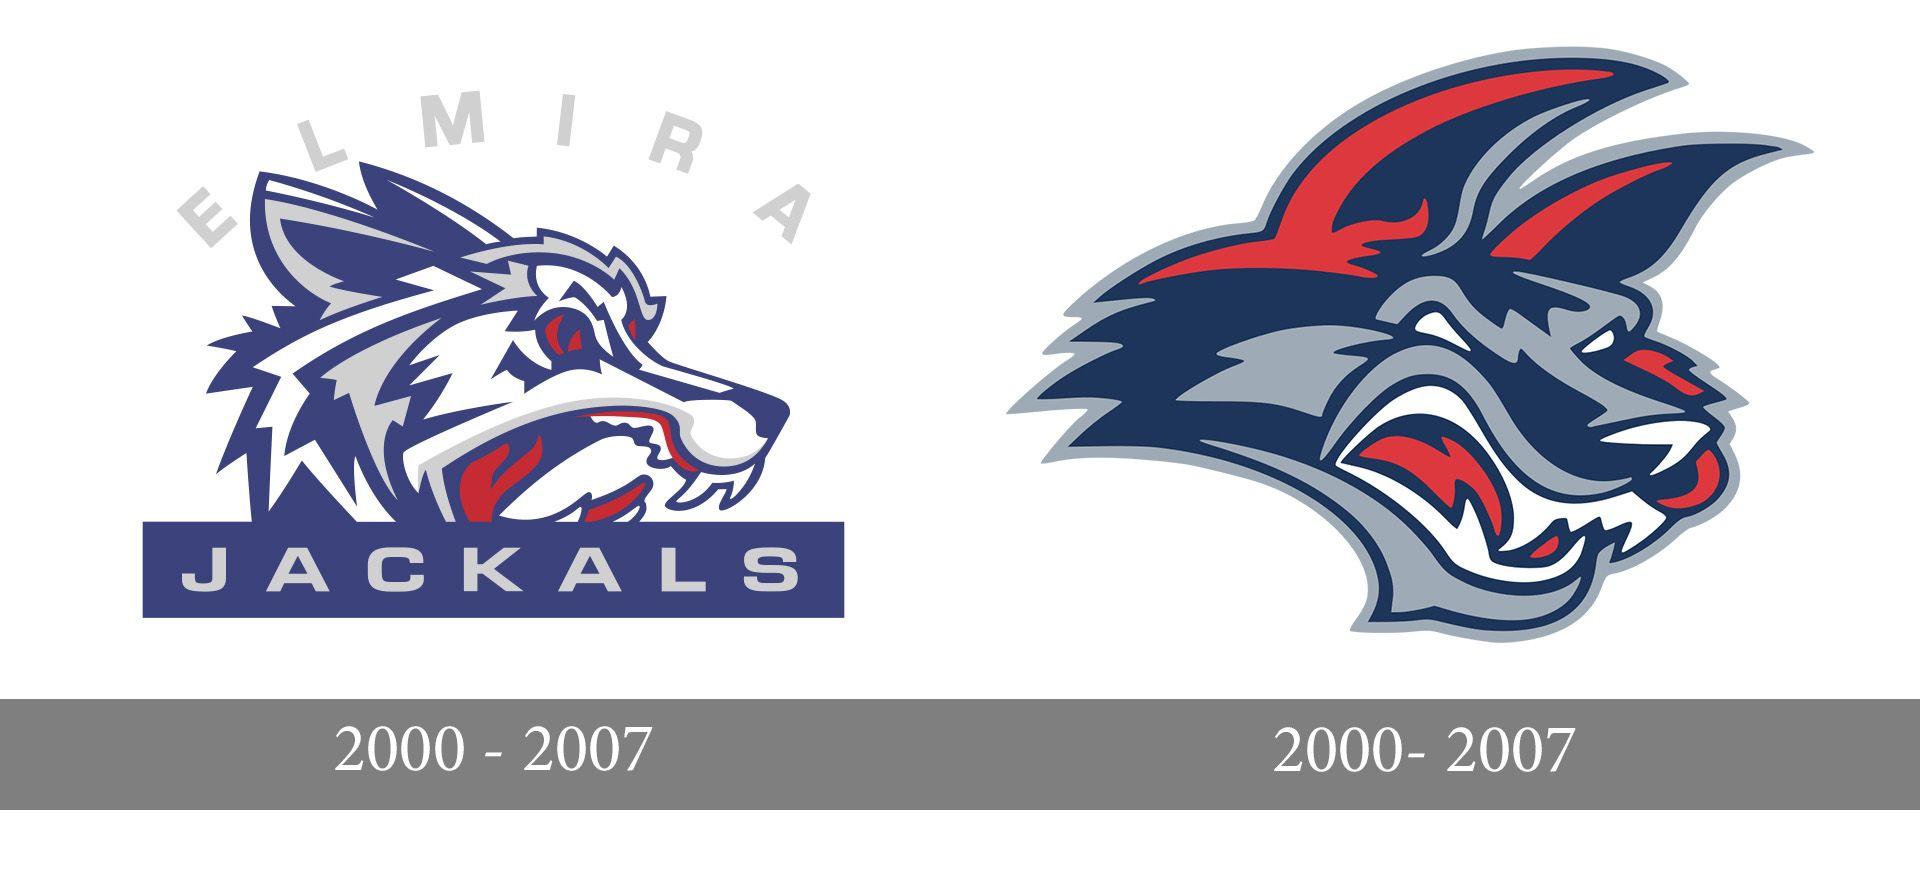 Jackal Logo - Elmira Jackals logo, Elmira Jackals Symbol, Meaning, History